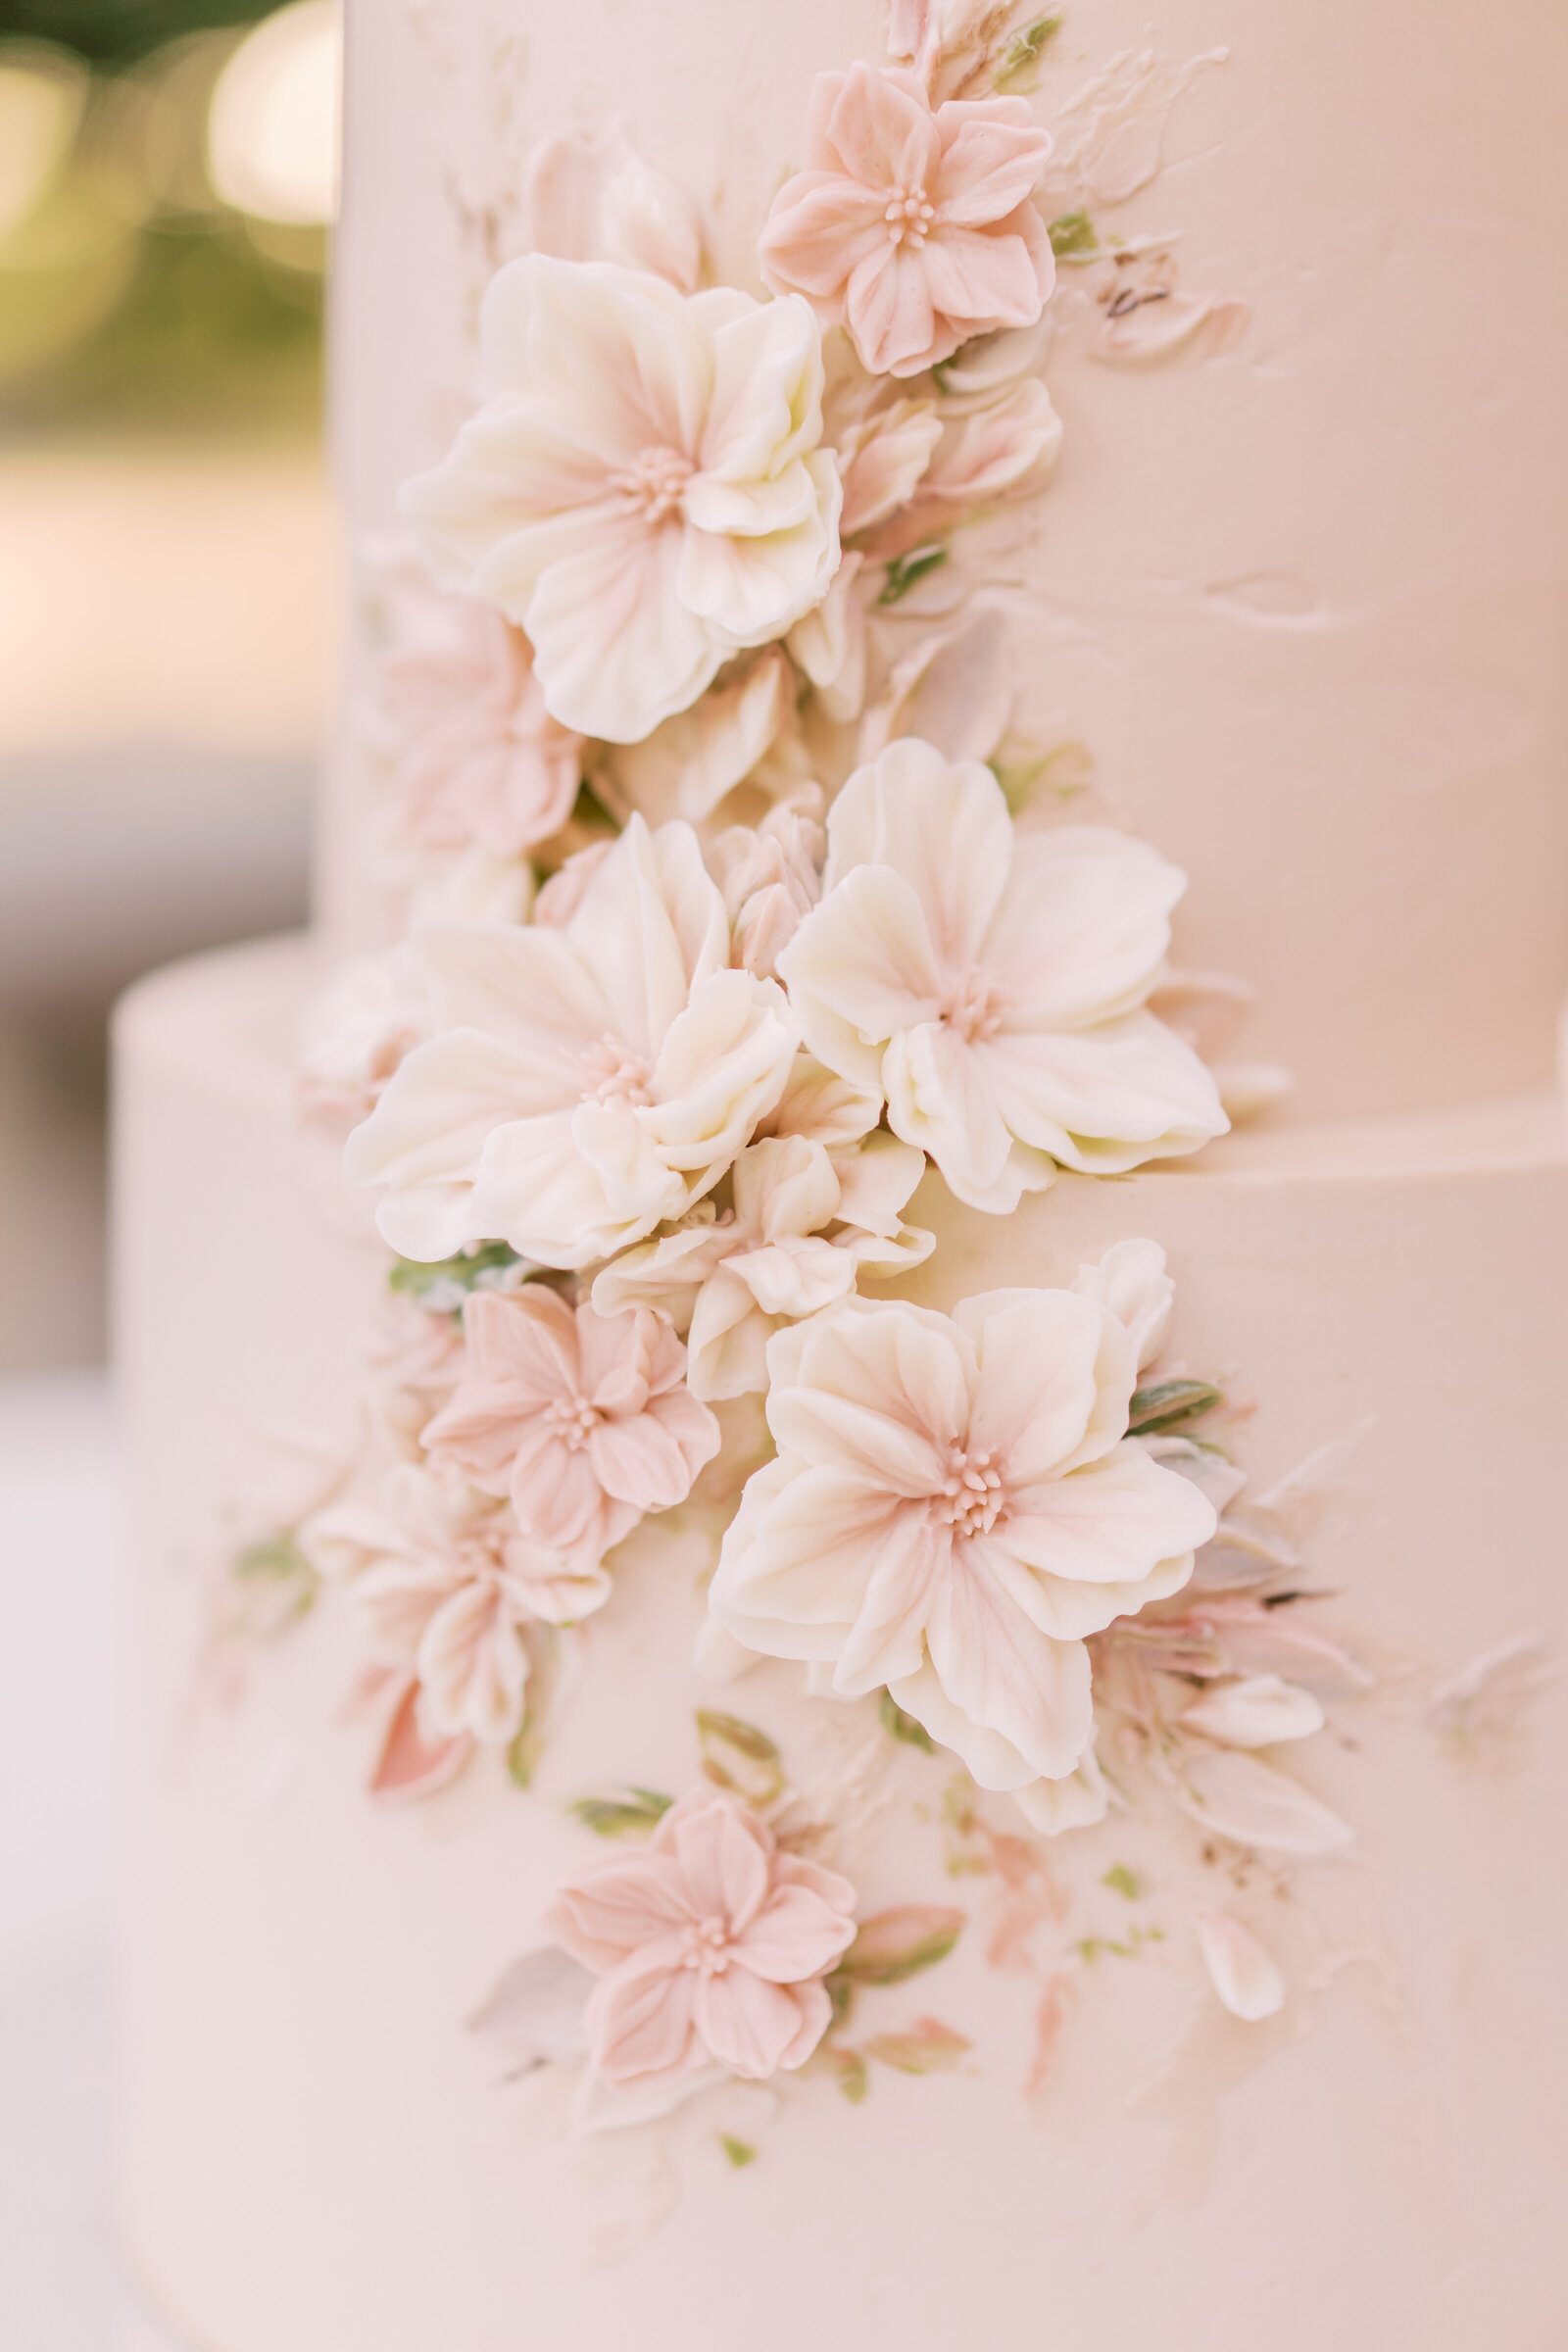 Portrait of a blush-colored wedding cake with blush flowers.